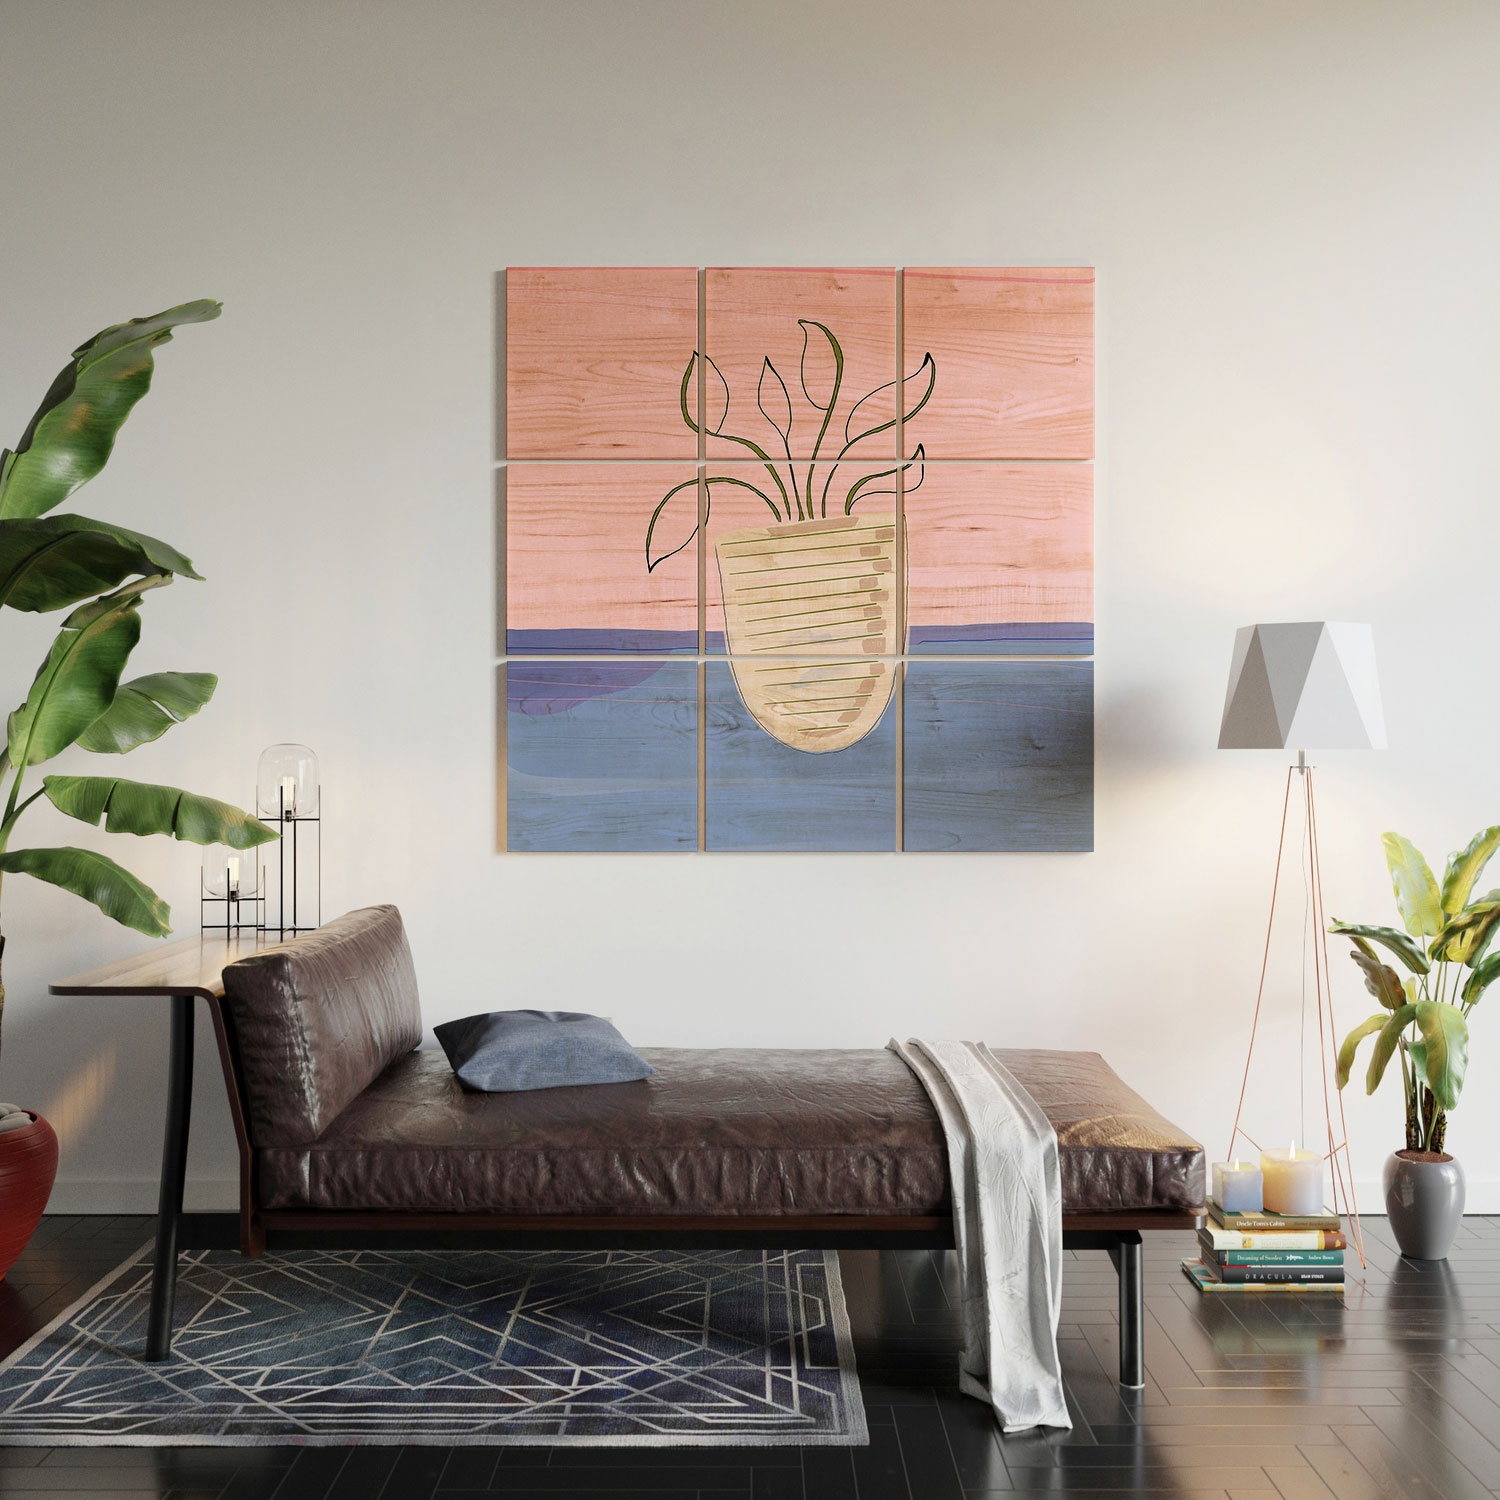 Sprout by Laura Fedorowicz - Wood Wall Mural3' X 3' (Nine 12" Wood Squares) - Image 1